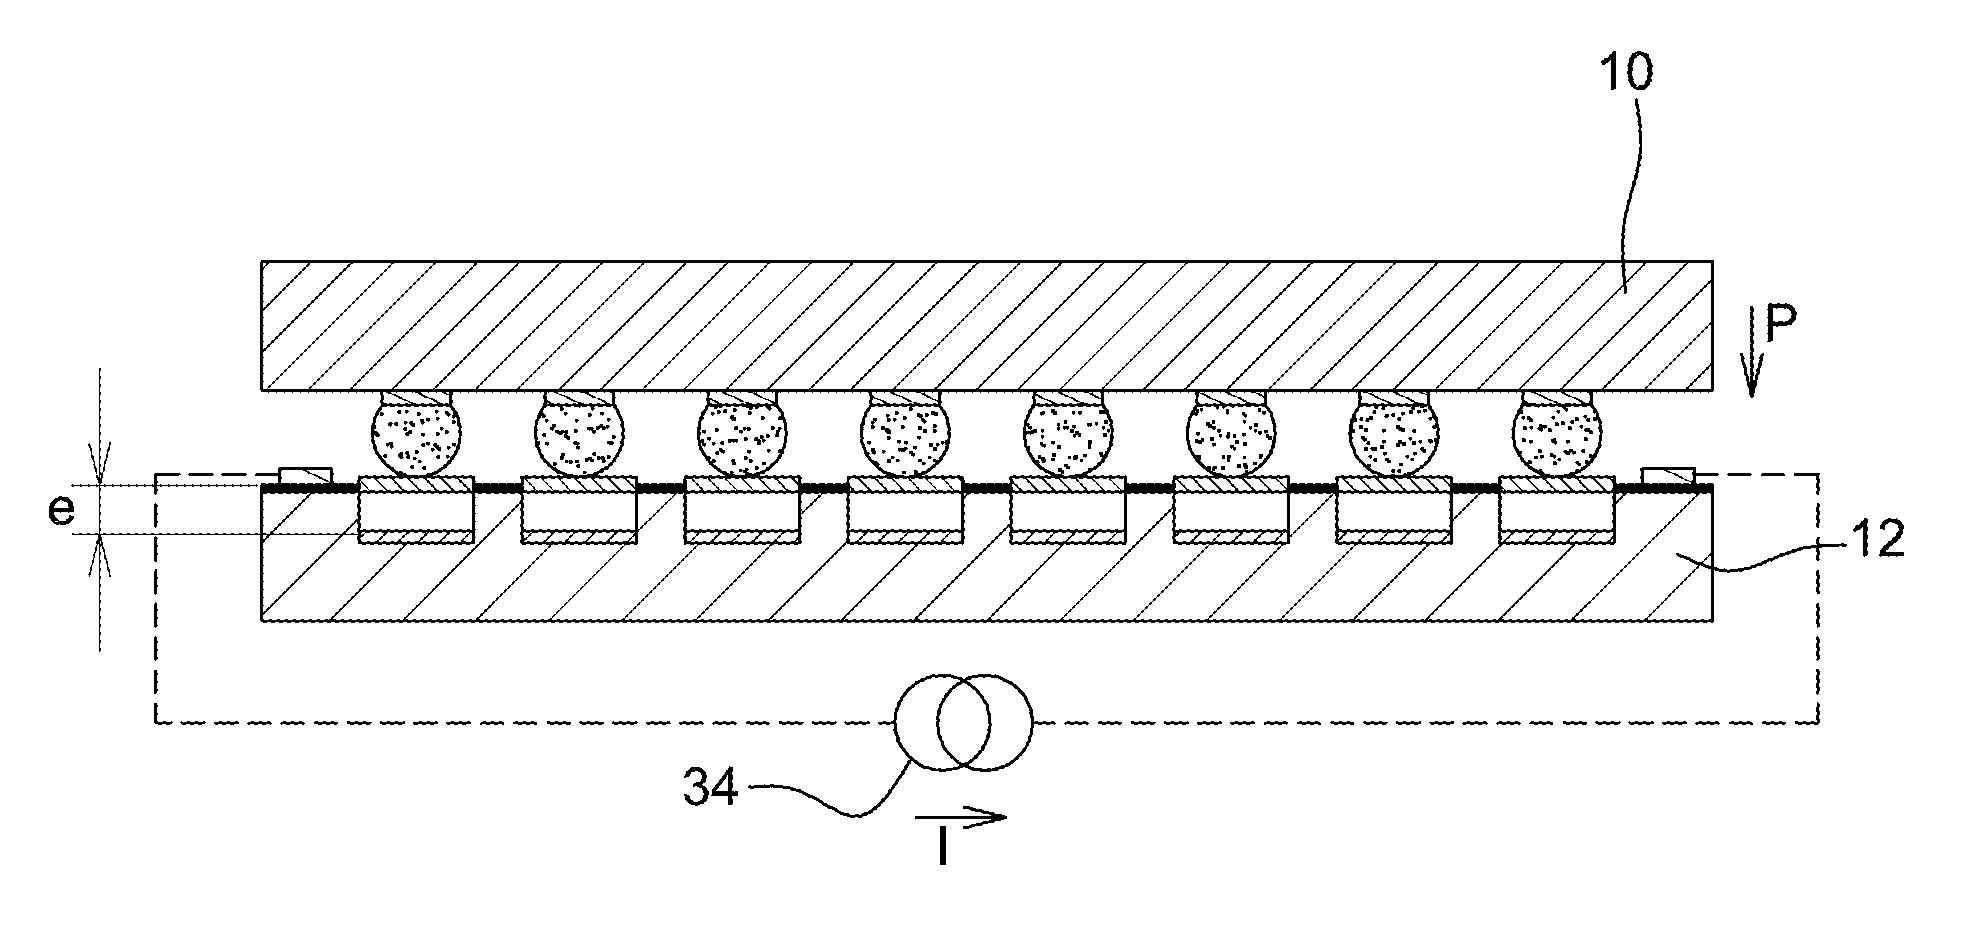 Flip-chip hybridization of microelectronic components using suspended fusible resistive connection elements